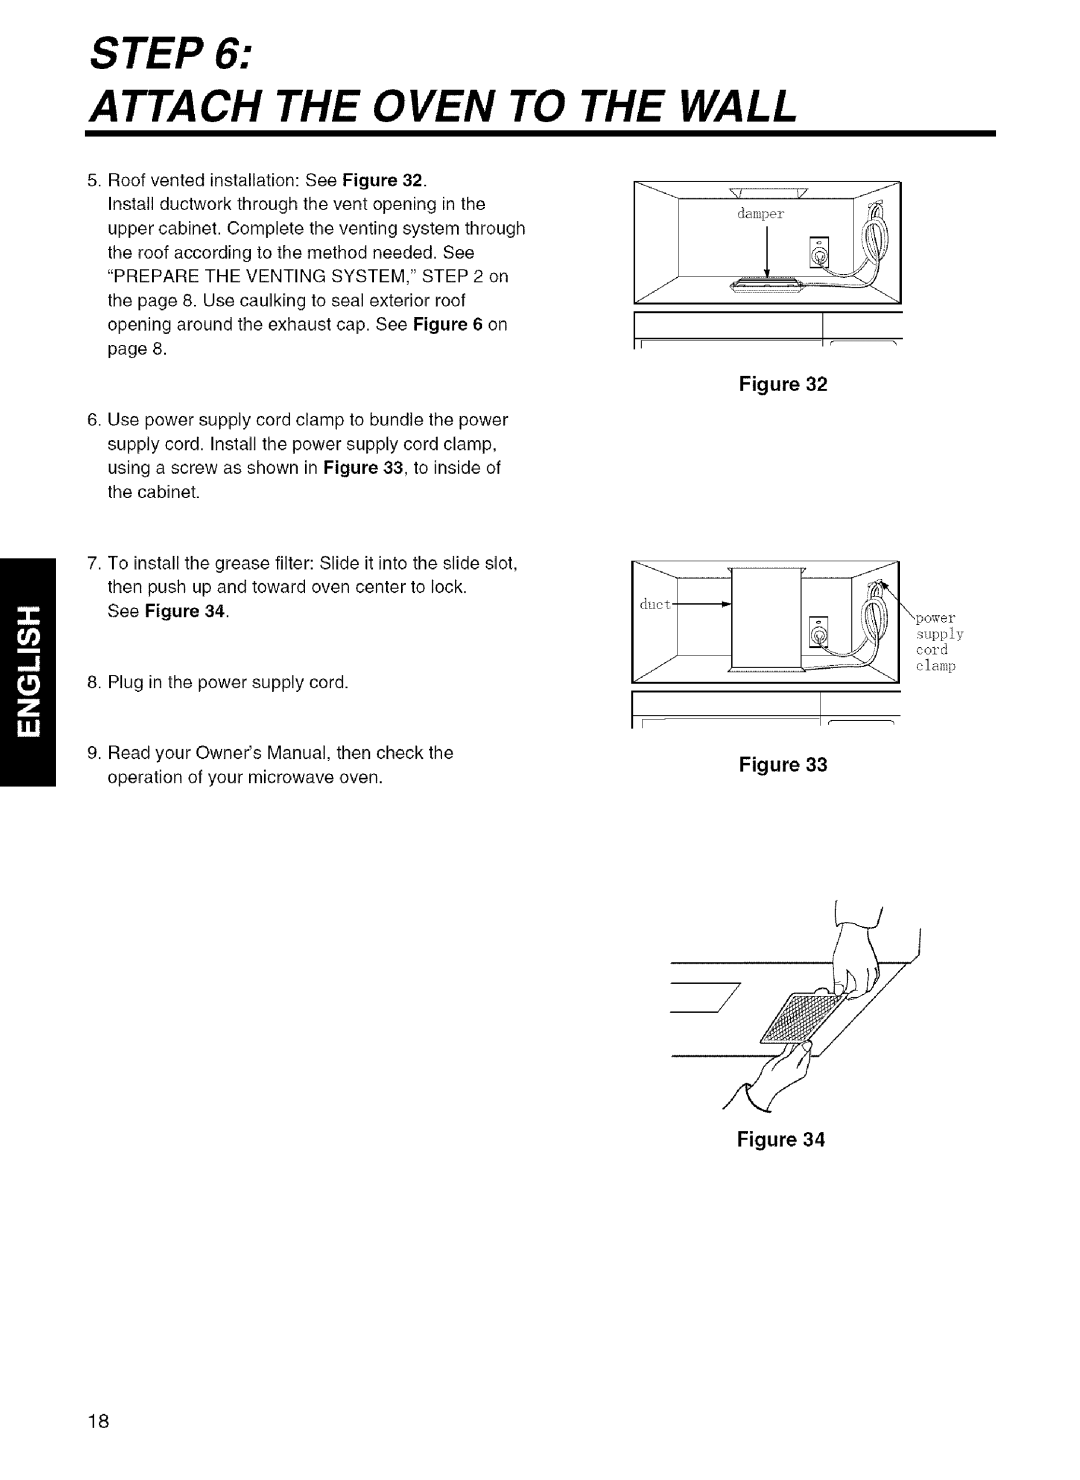 Kenmore 721.80043, 721.80049, 721.80042, 721.80044 installation instructions Step Attach The Oven To The Wall 